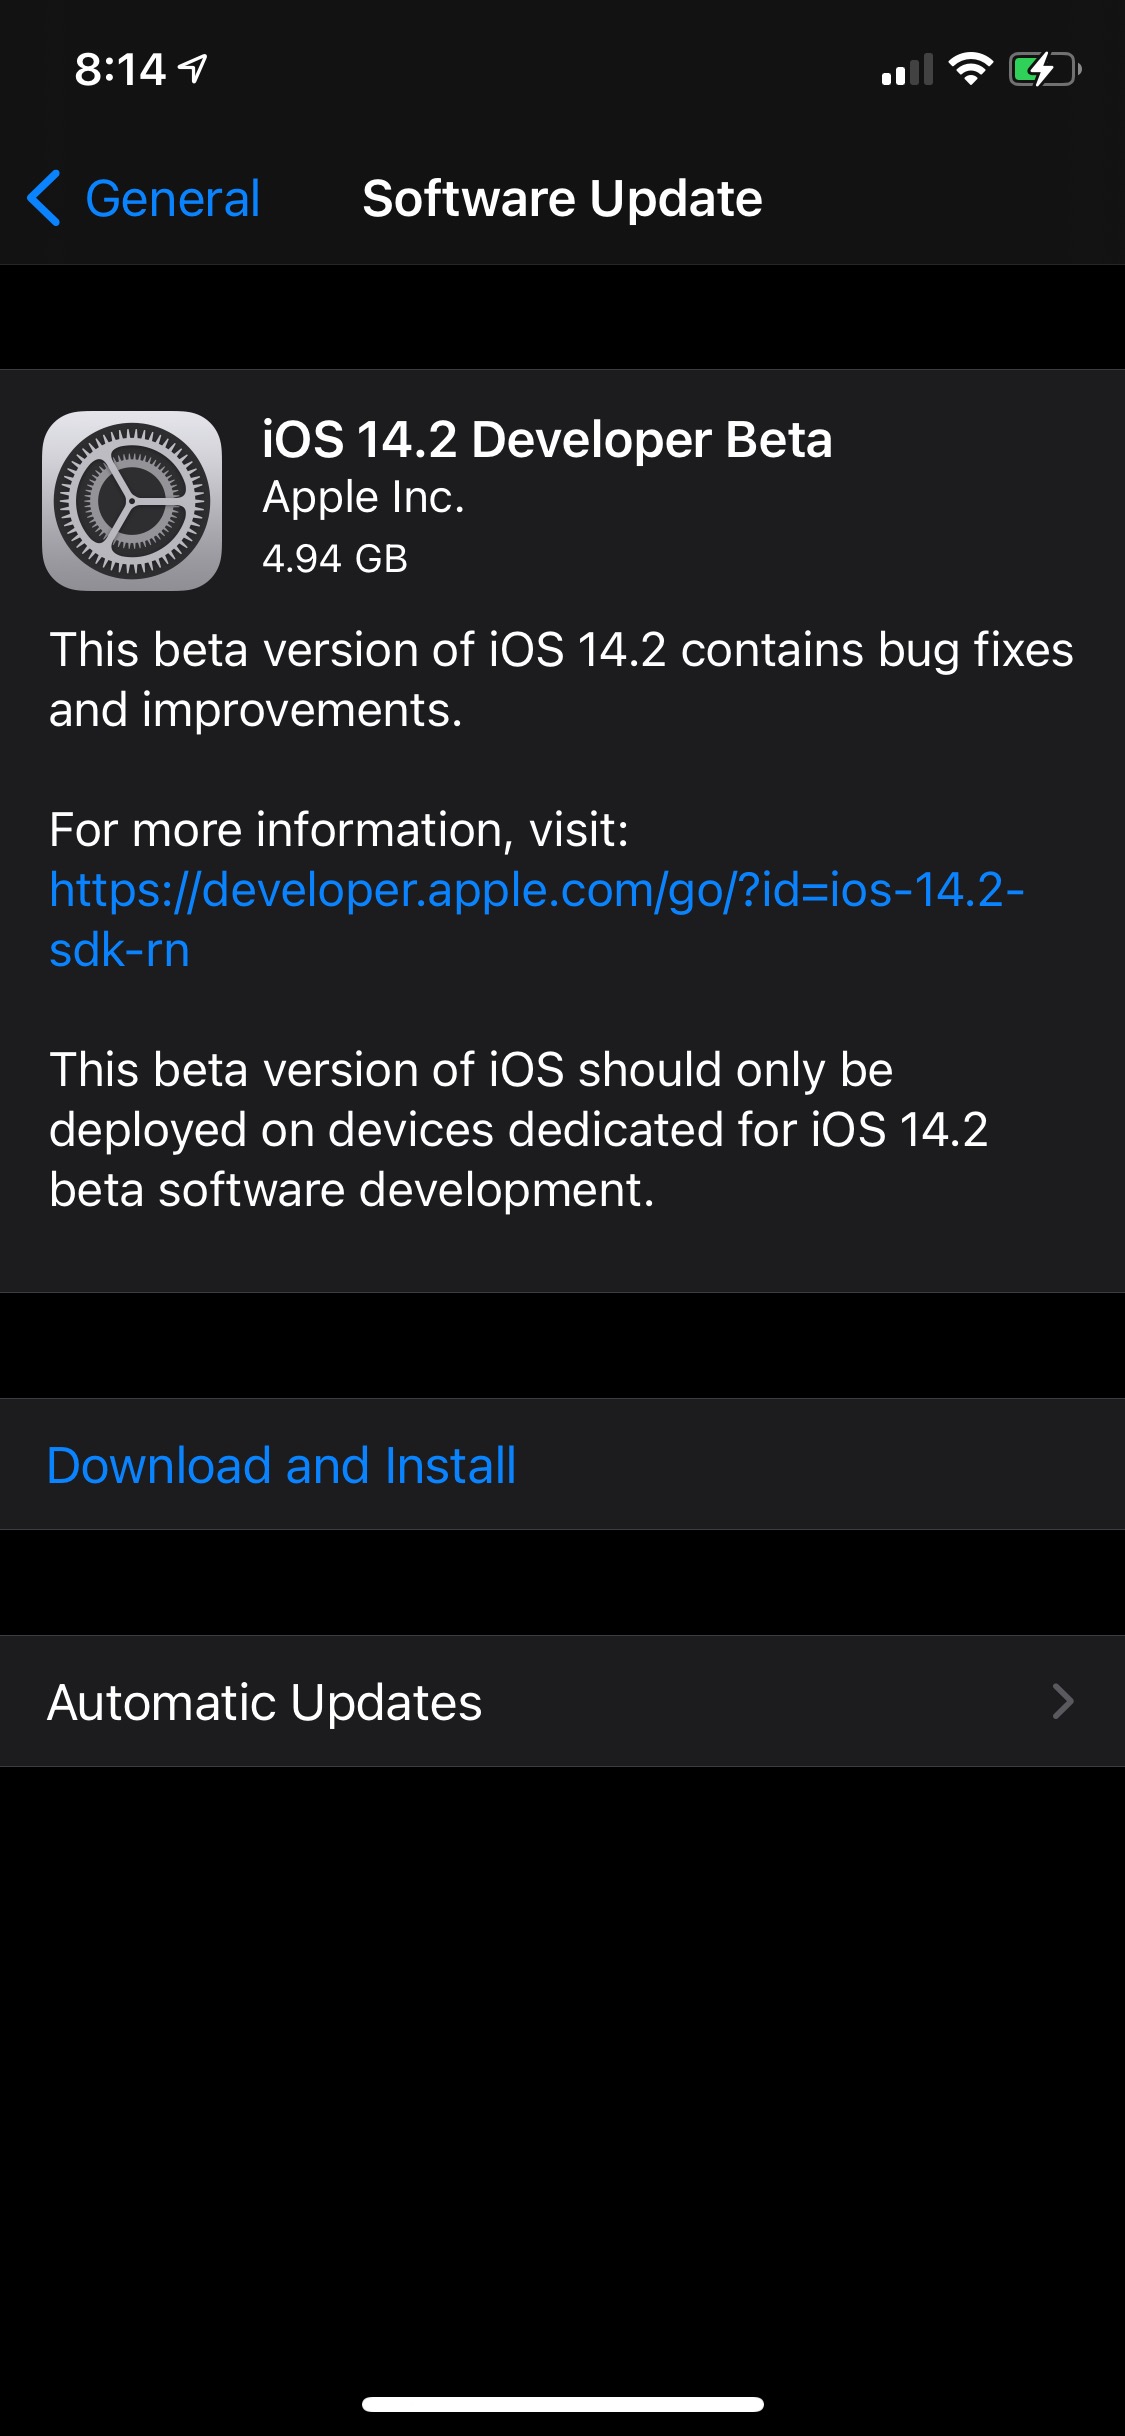 Apple Releases iOS 14.2 Beta and iPadOS 14.2 Beta [Download]